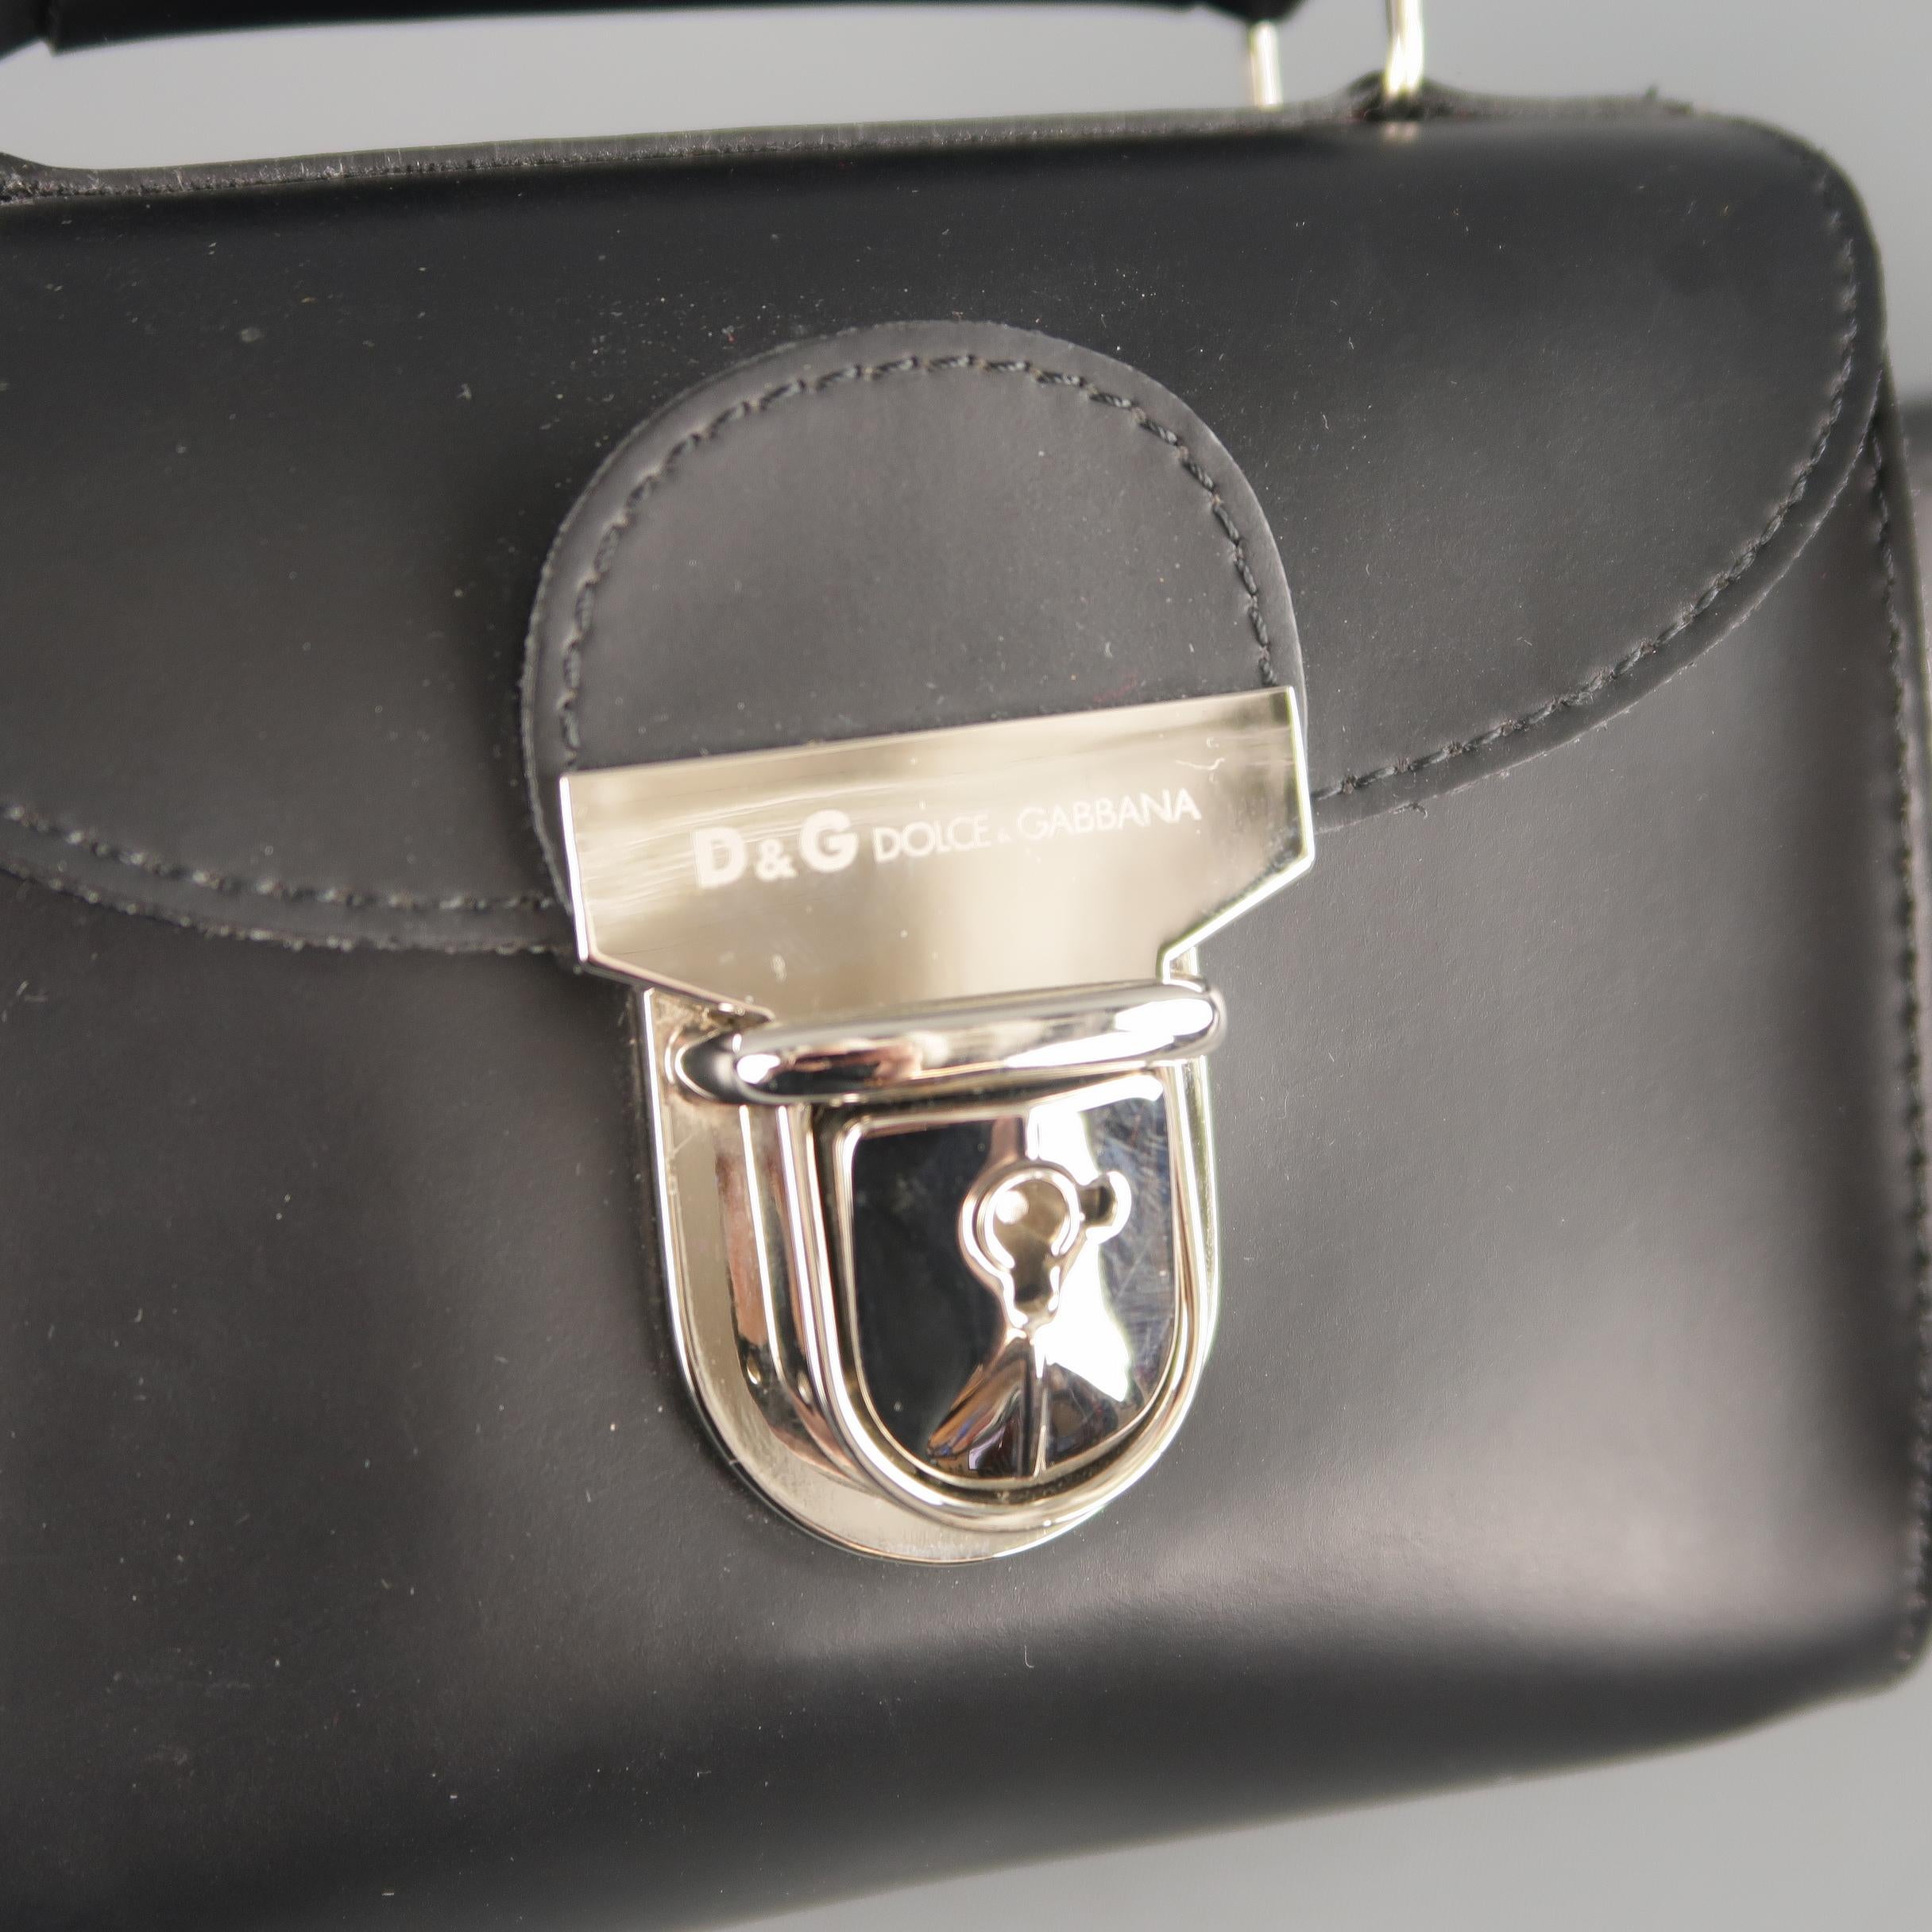 D&G DOLCE & GABBANA belt bag comes in black rubber vinyl and features a mini purse with silver tone buckle closure on a thick, detachable belt. Damage on key clochette. As-is. Made in Italy.
 
Very Good Pre-Owned Condition.
 
Measurements:
